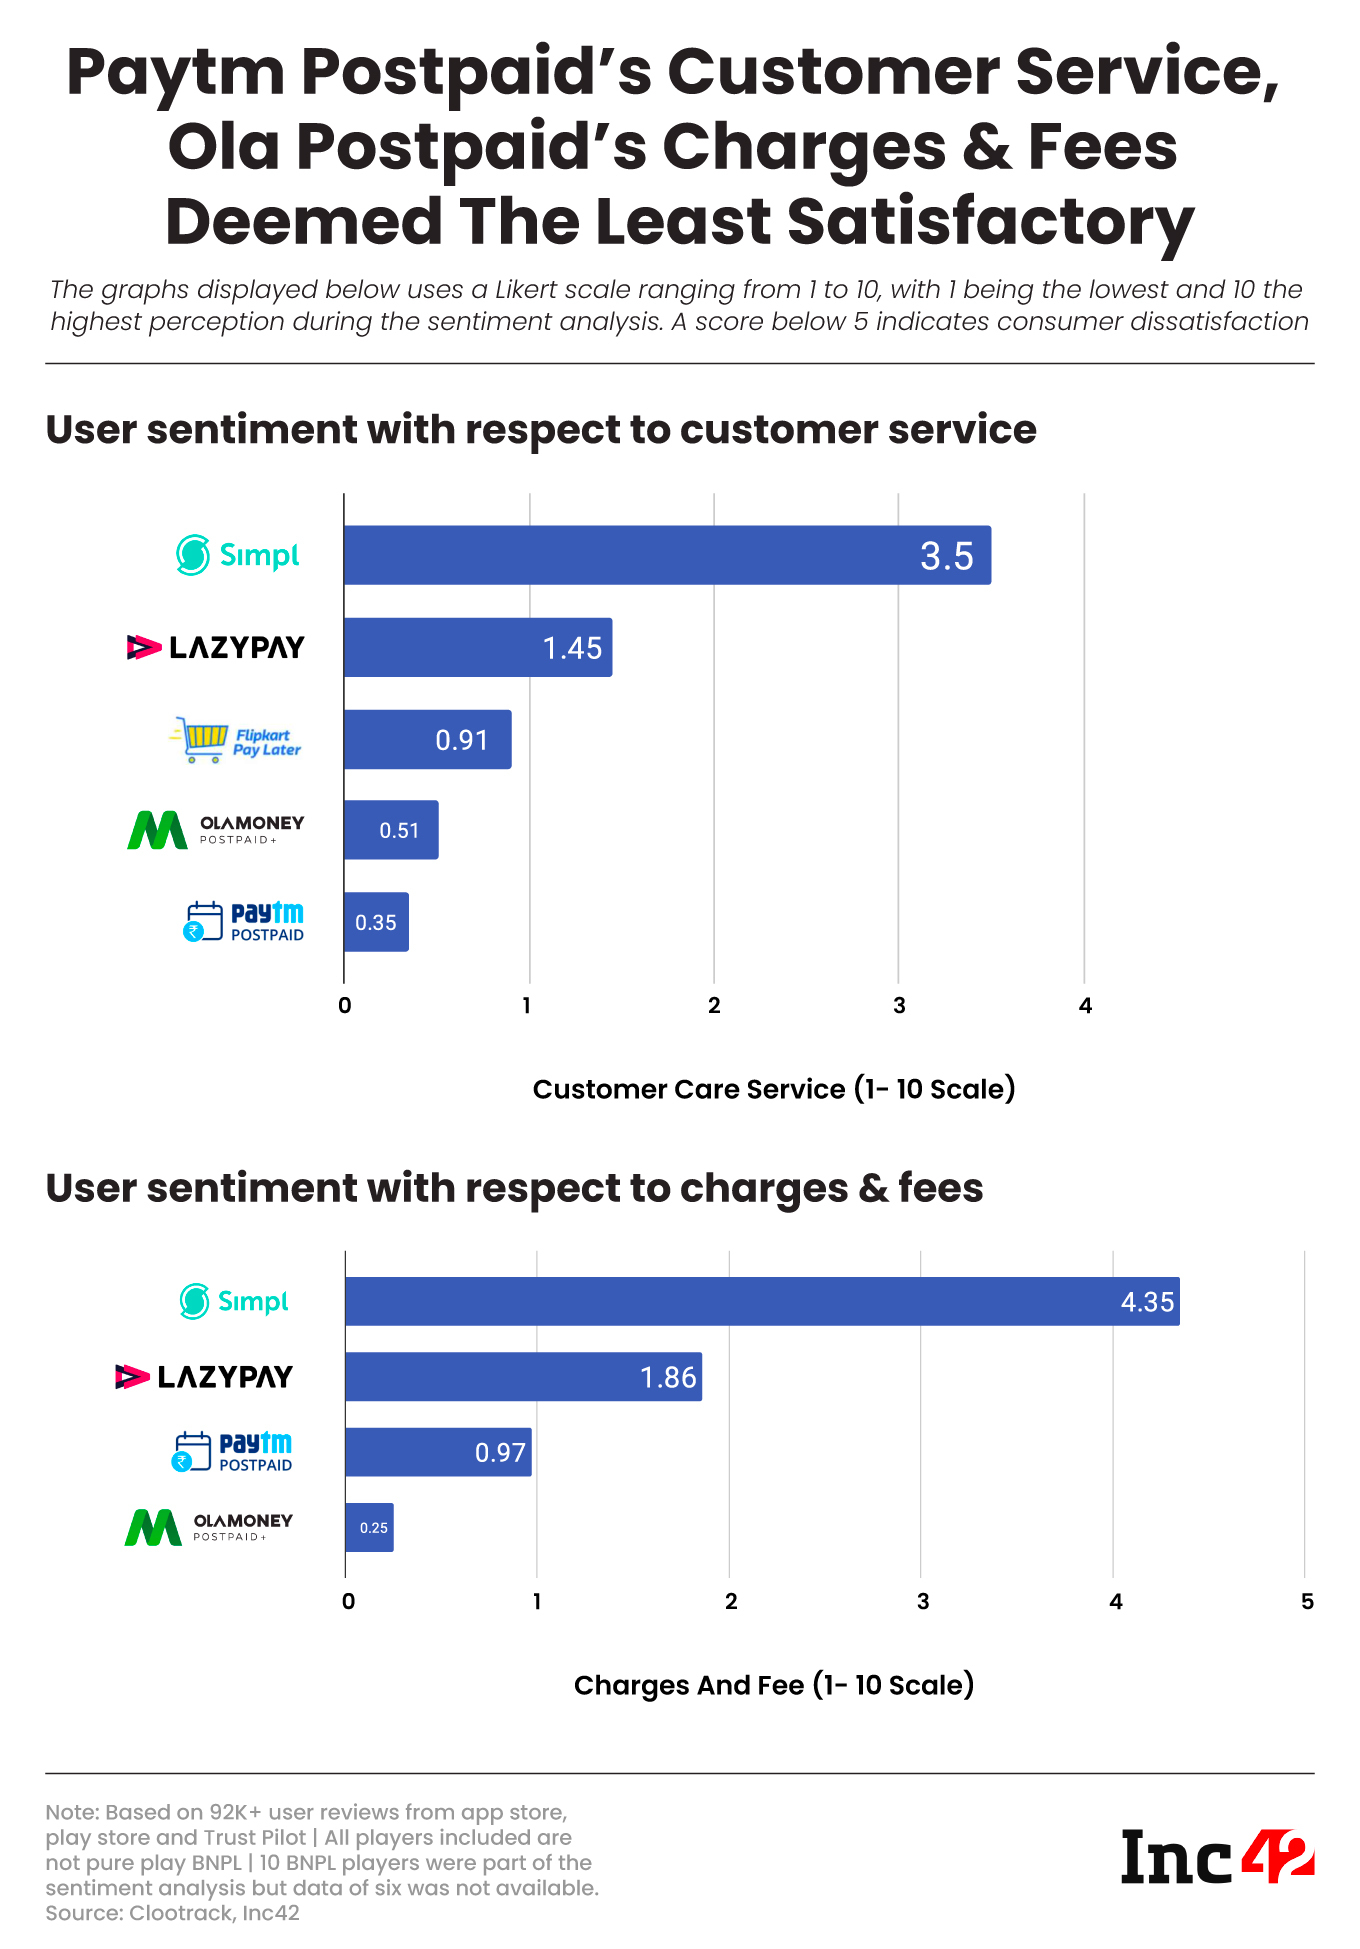 Paytm Postpaid’s Customer Service, Ola Postpaid’s Charges & Fees Deemed The Least Satisfactory